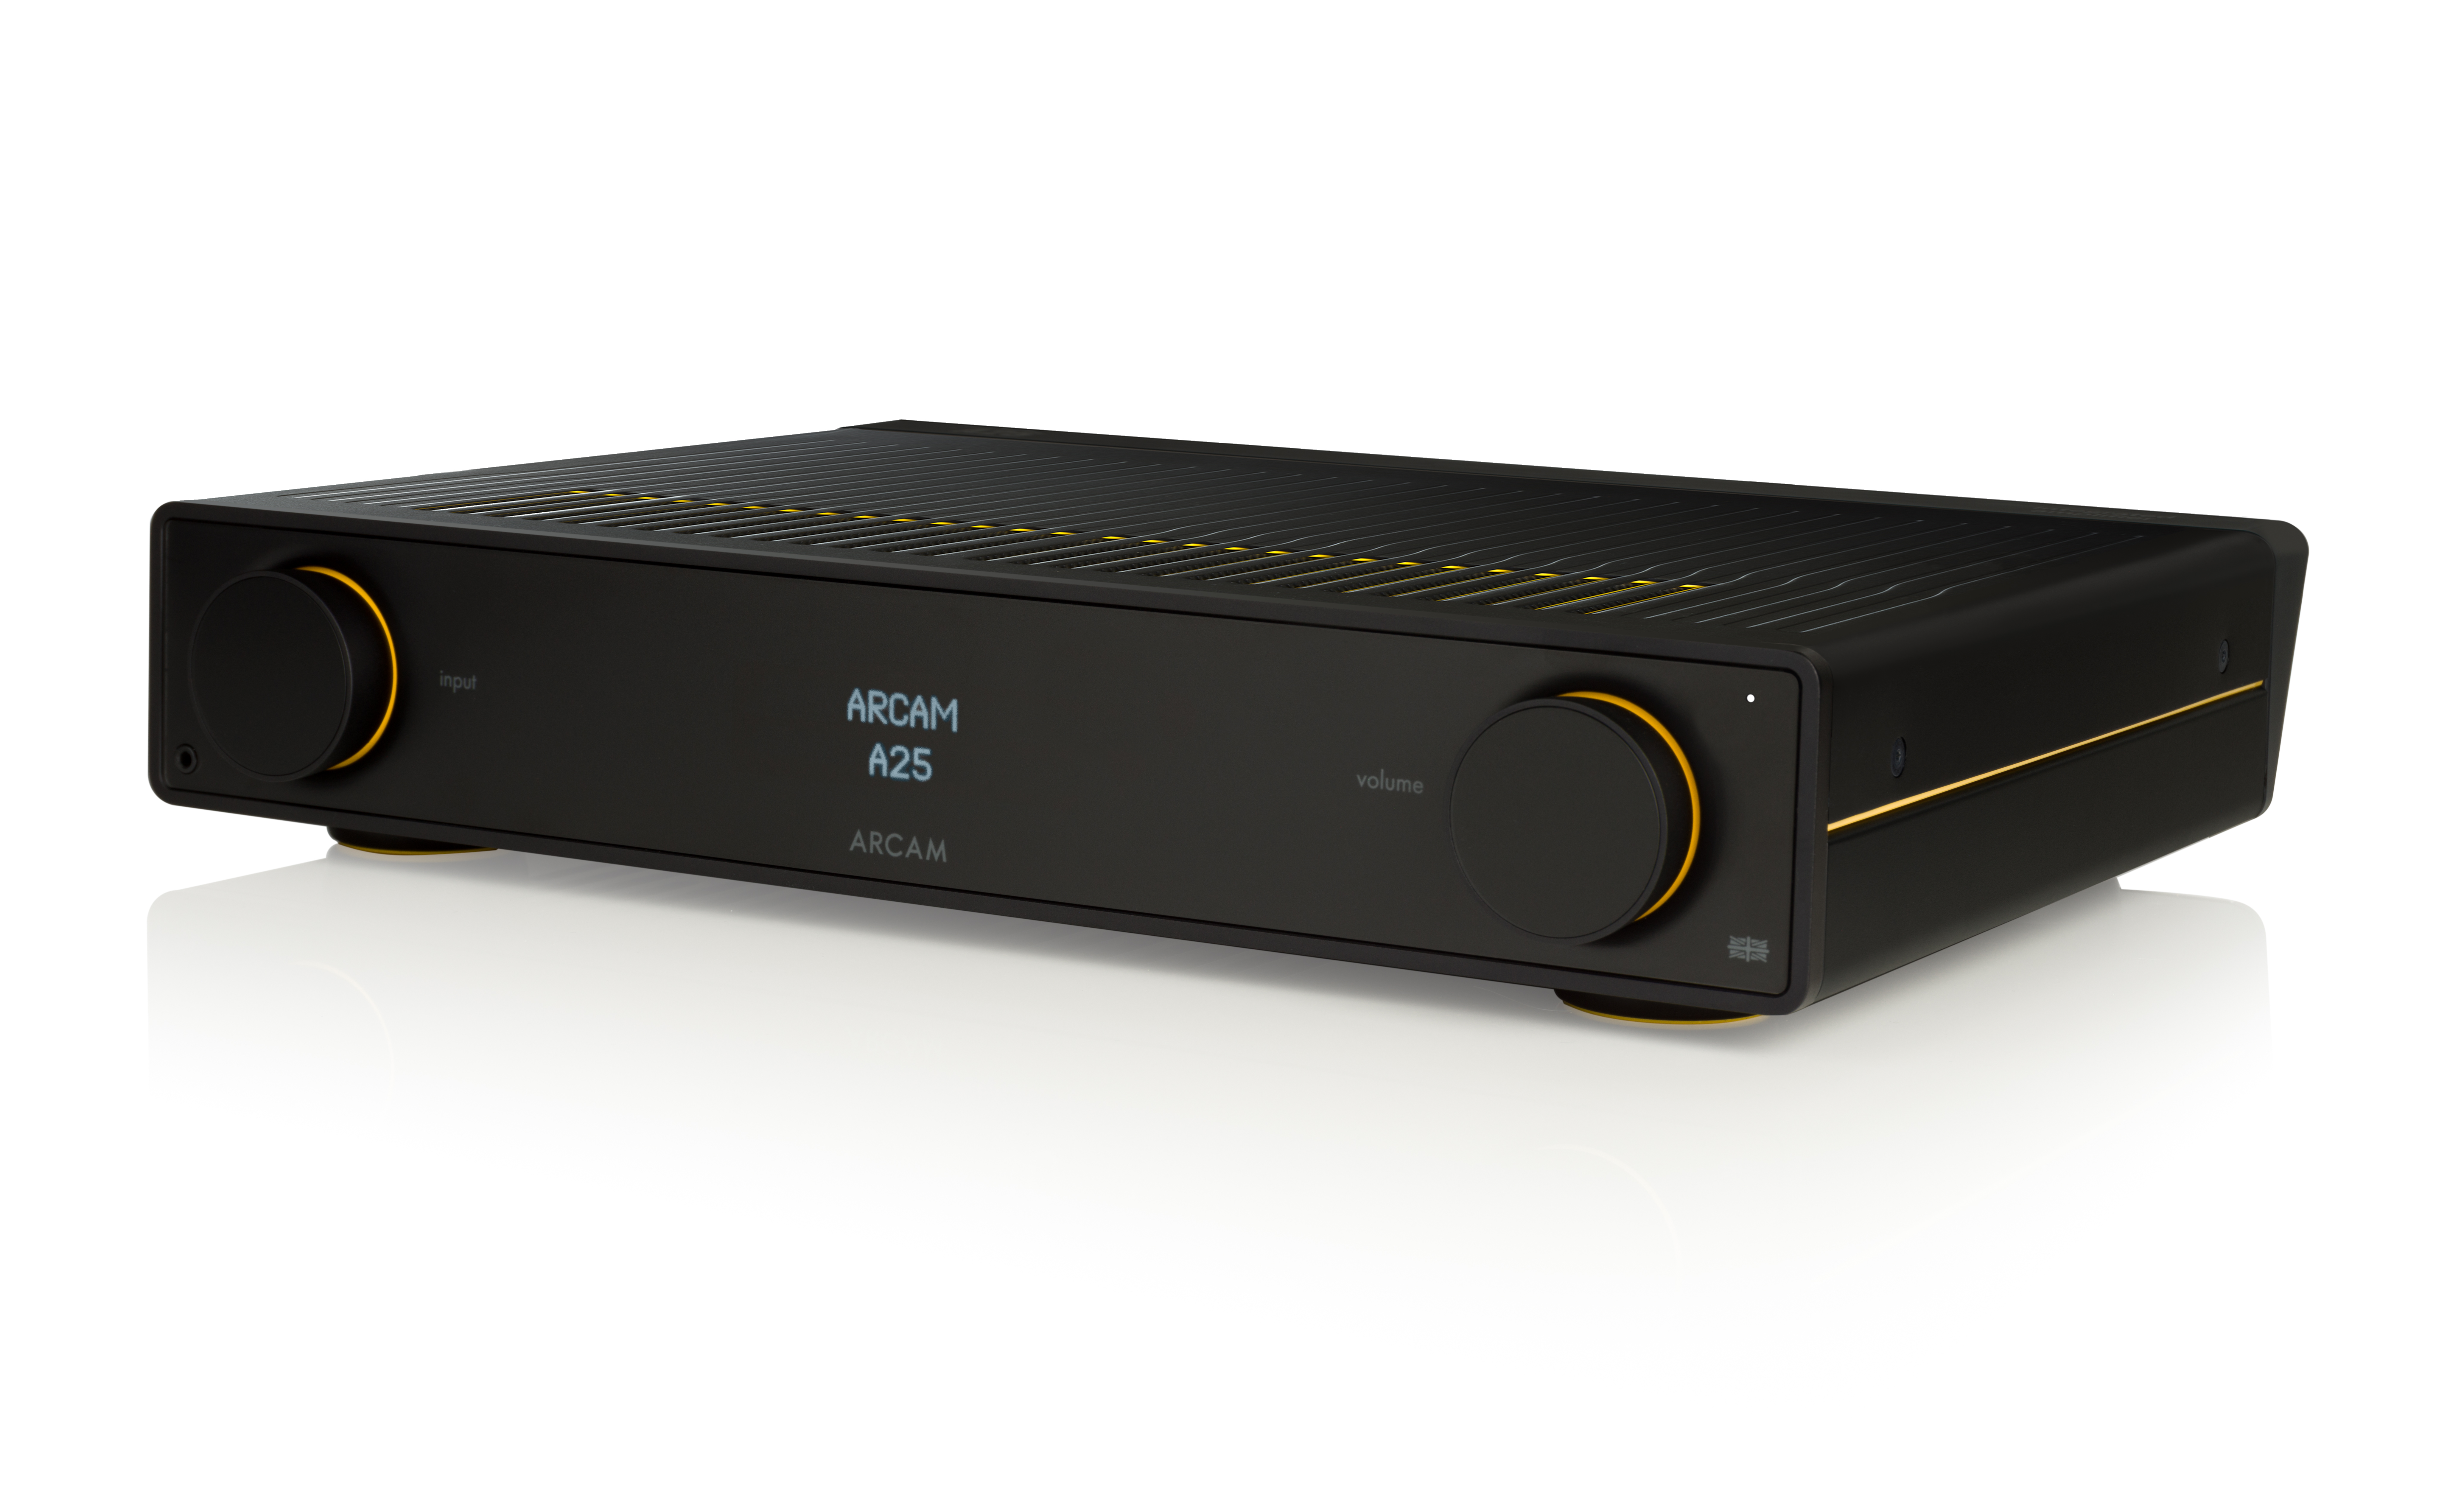 The ARCAM A25 integrated amplifier showing off a stripe of Radia Yellow detailing